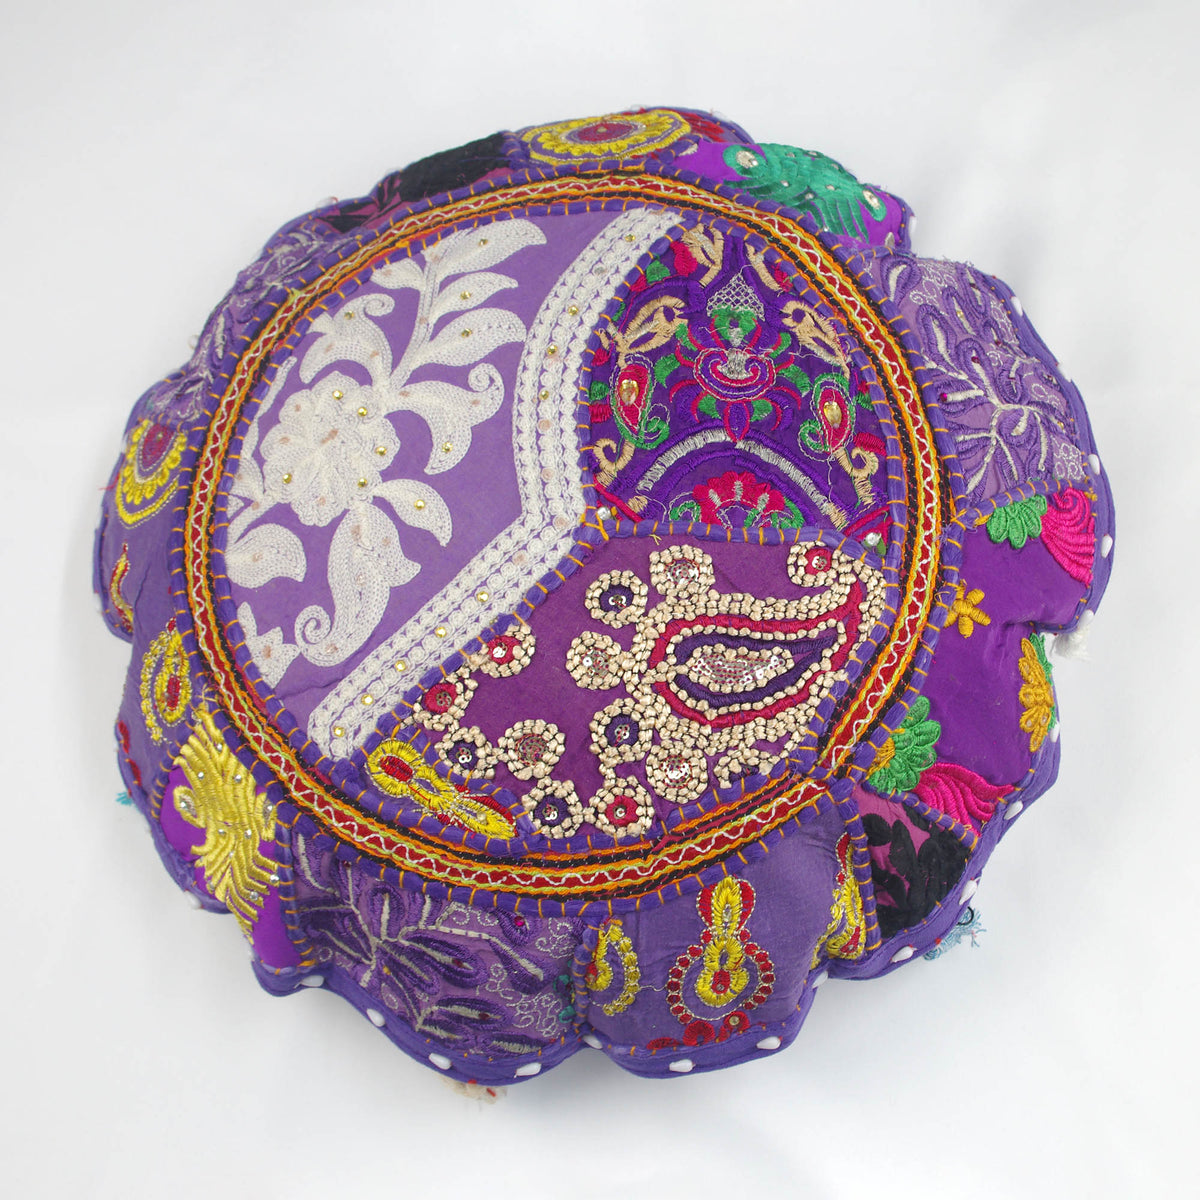 Round Purple Floor Embroidered Patchwork Pouf Ottoman Indian Vintage Cushion Cover 18"